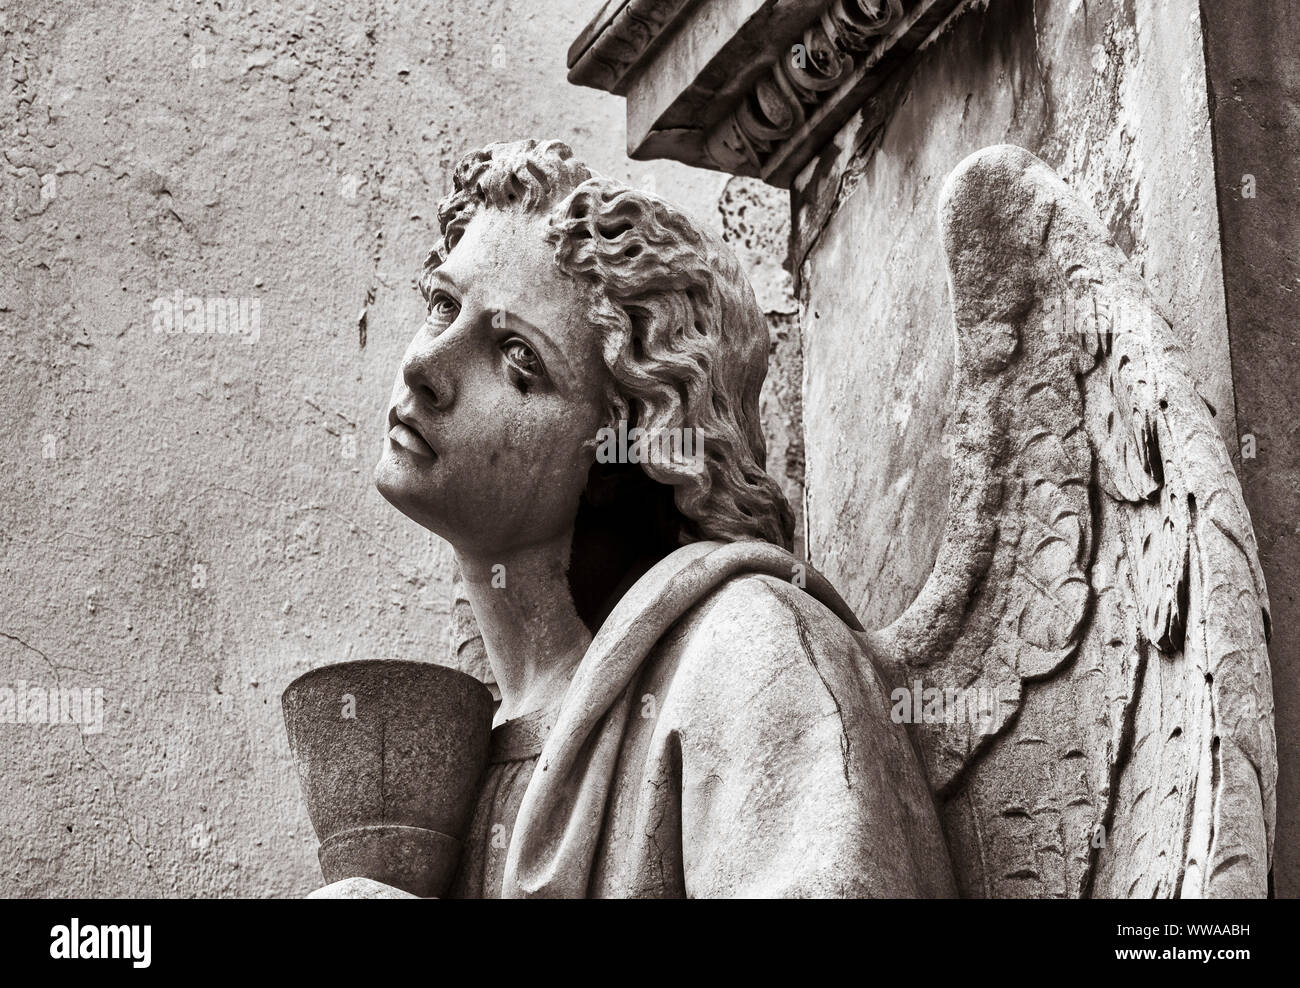 Weathered stone statue of angel in cemetery. Stock Photo